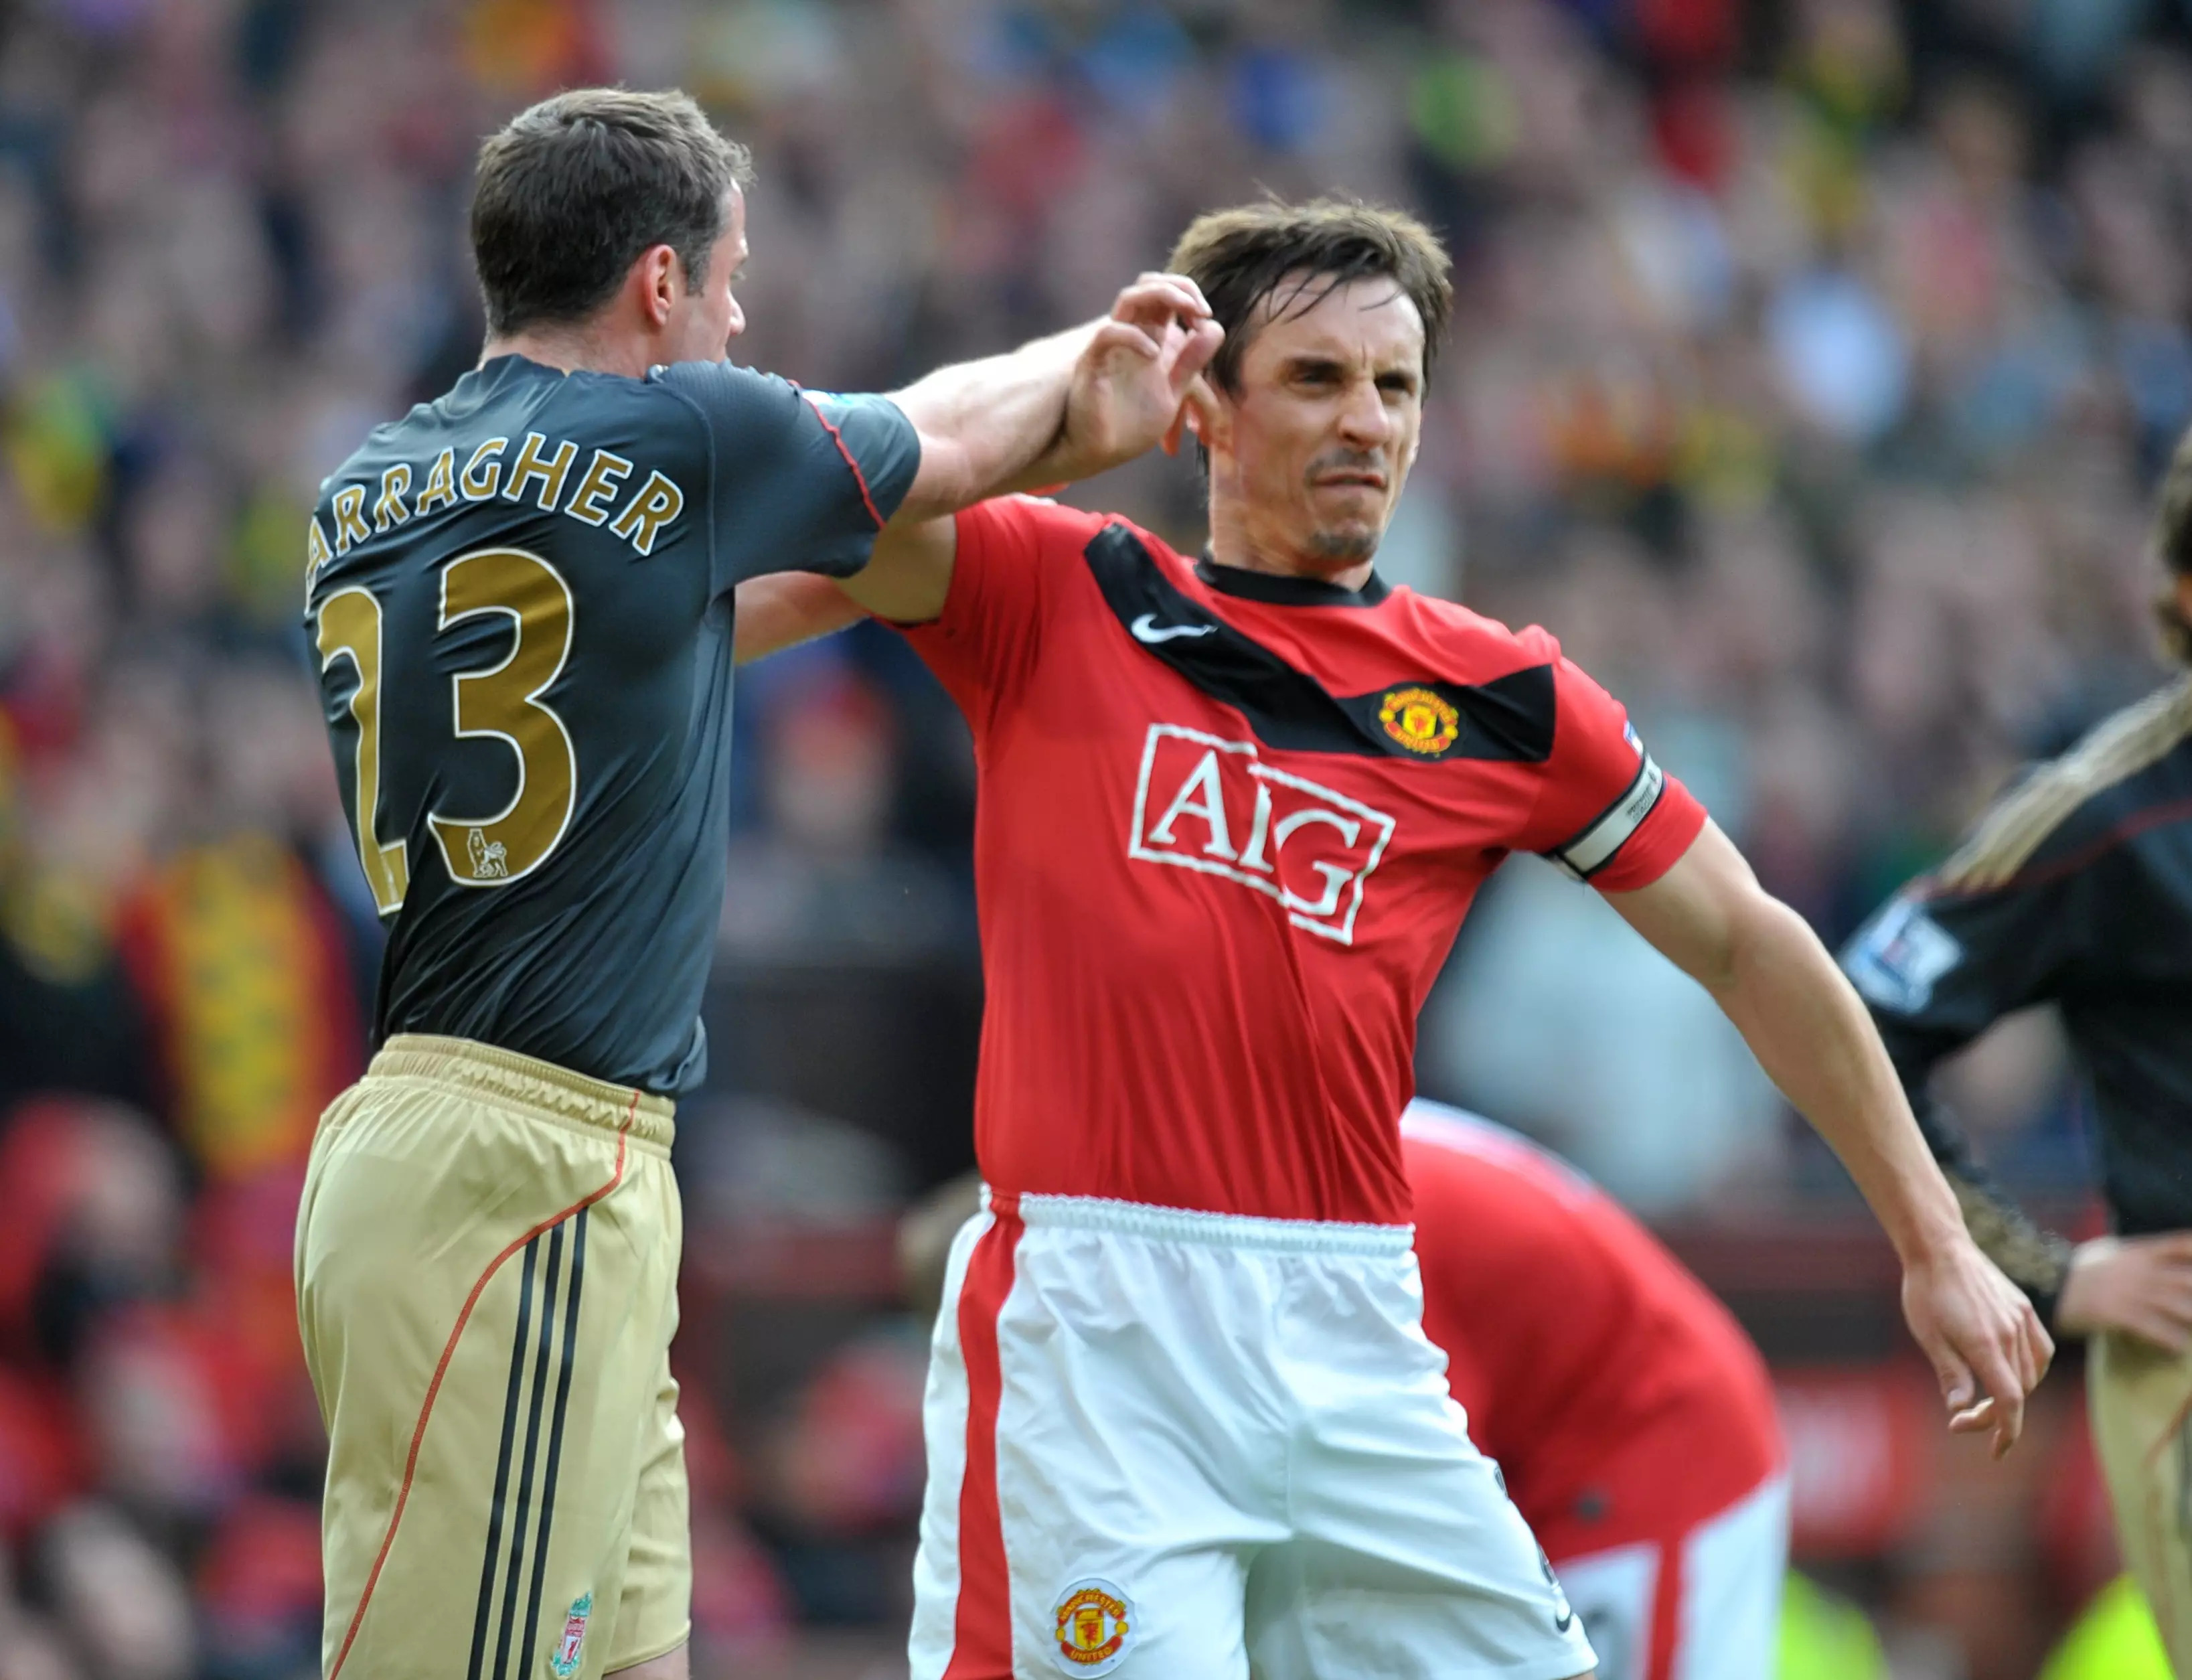 Gary Neville at his happiest - Scrapping with an angry Scouser. Images: PA